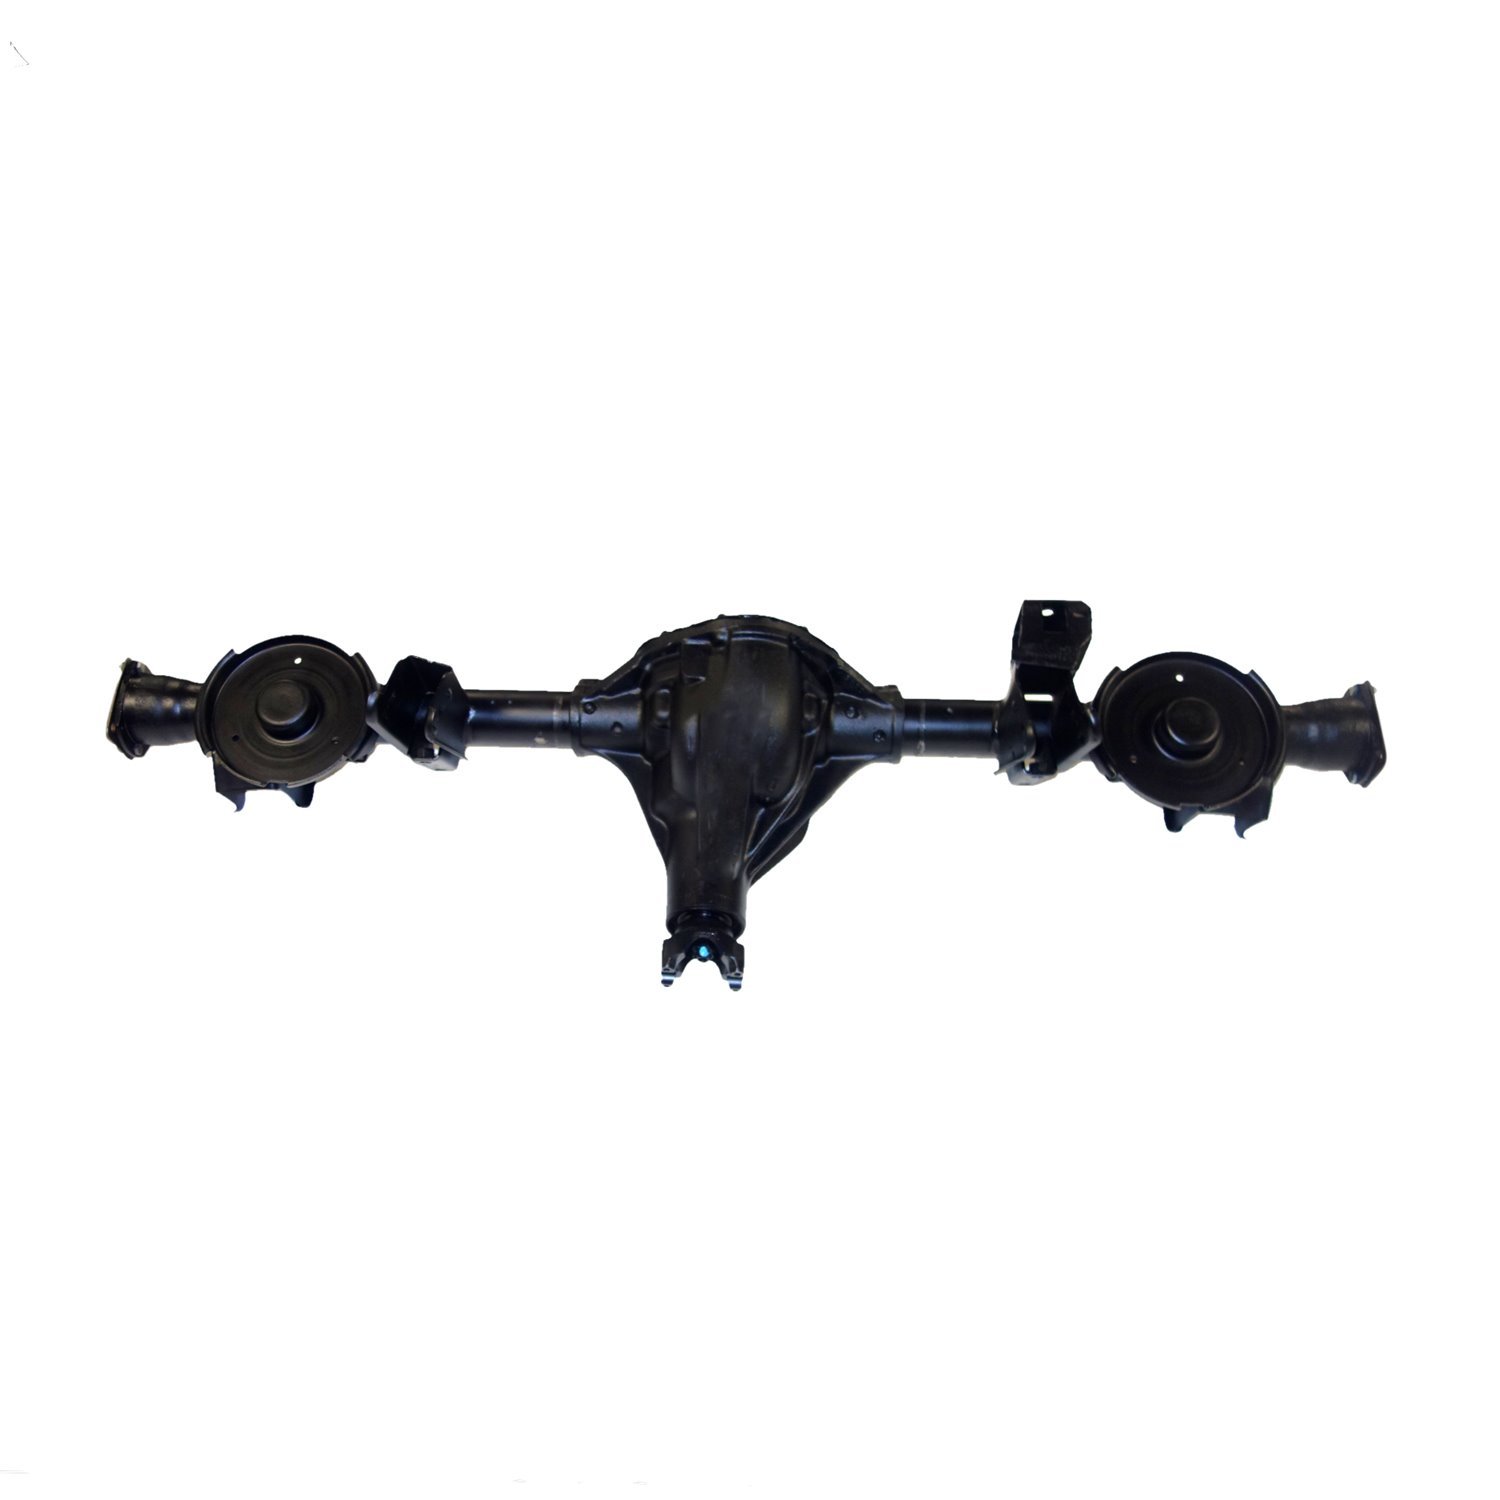 Remanufactured Complete Axle Assembly for Dana 44 97-02 Jeep Wrangler 3.73 Ratio